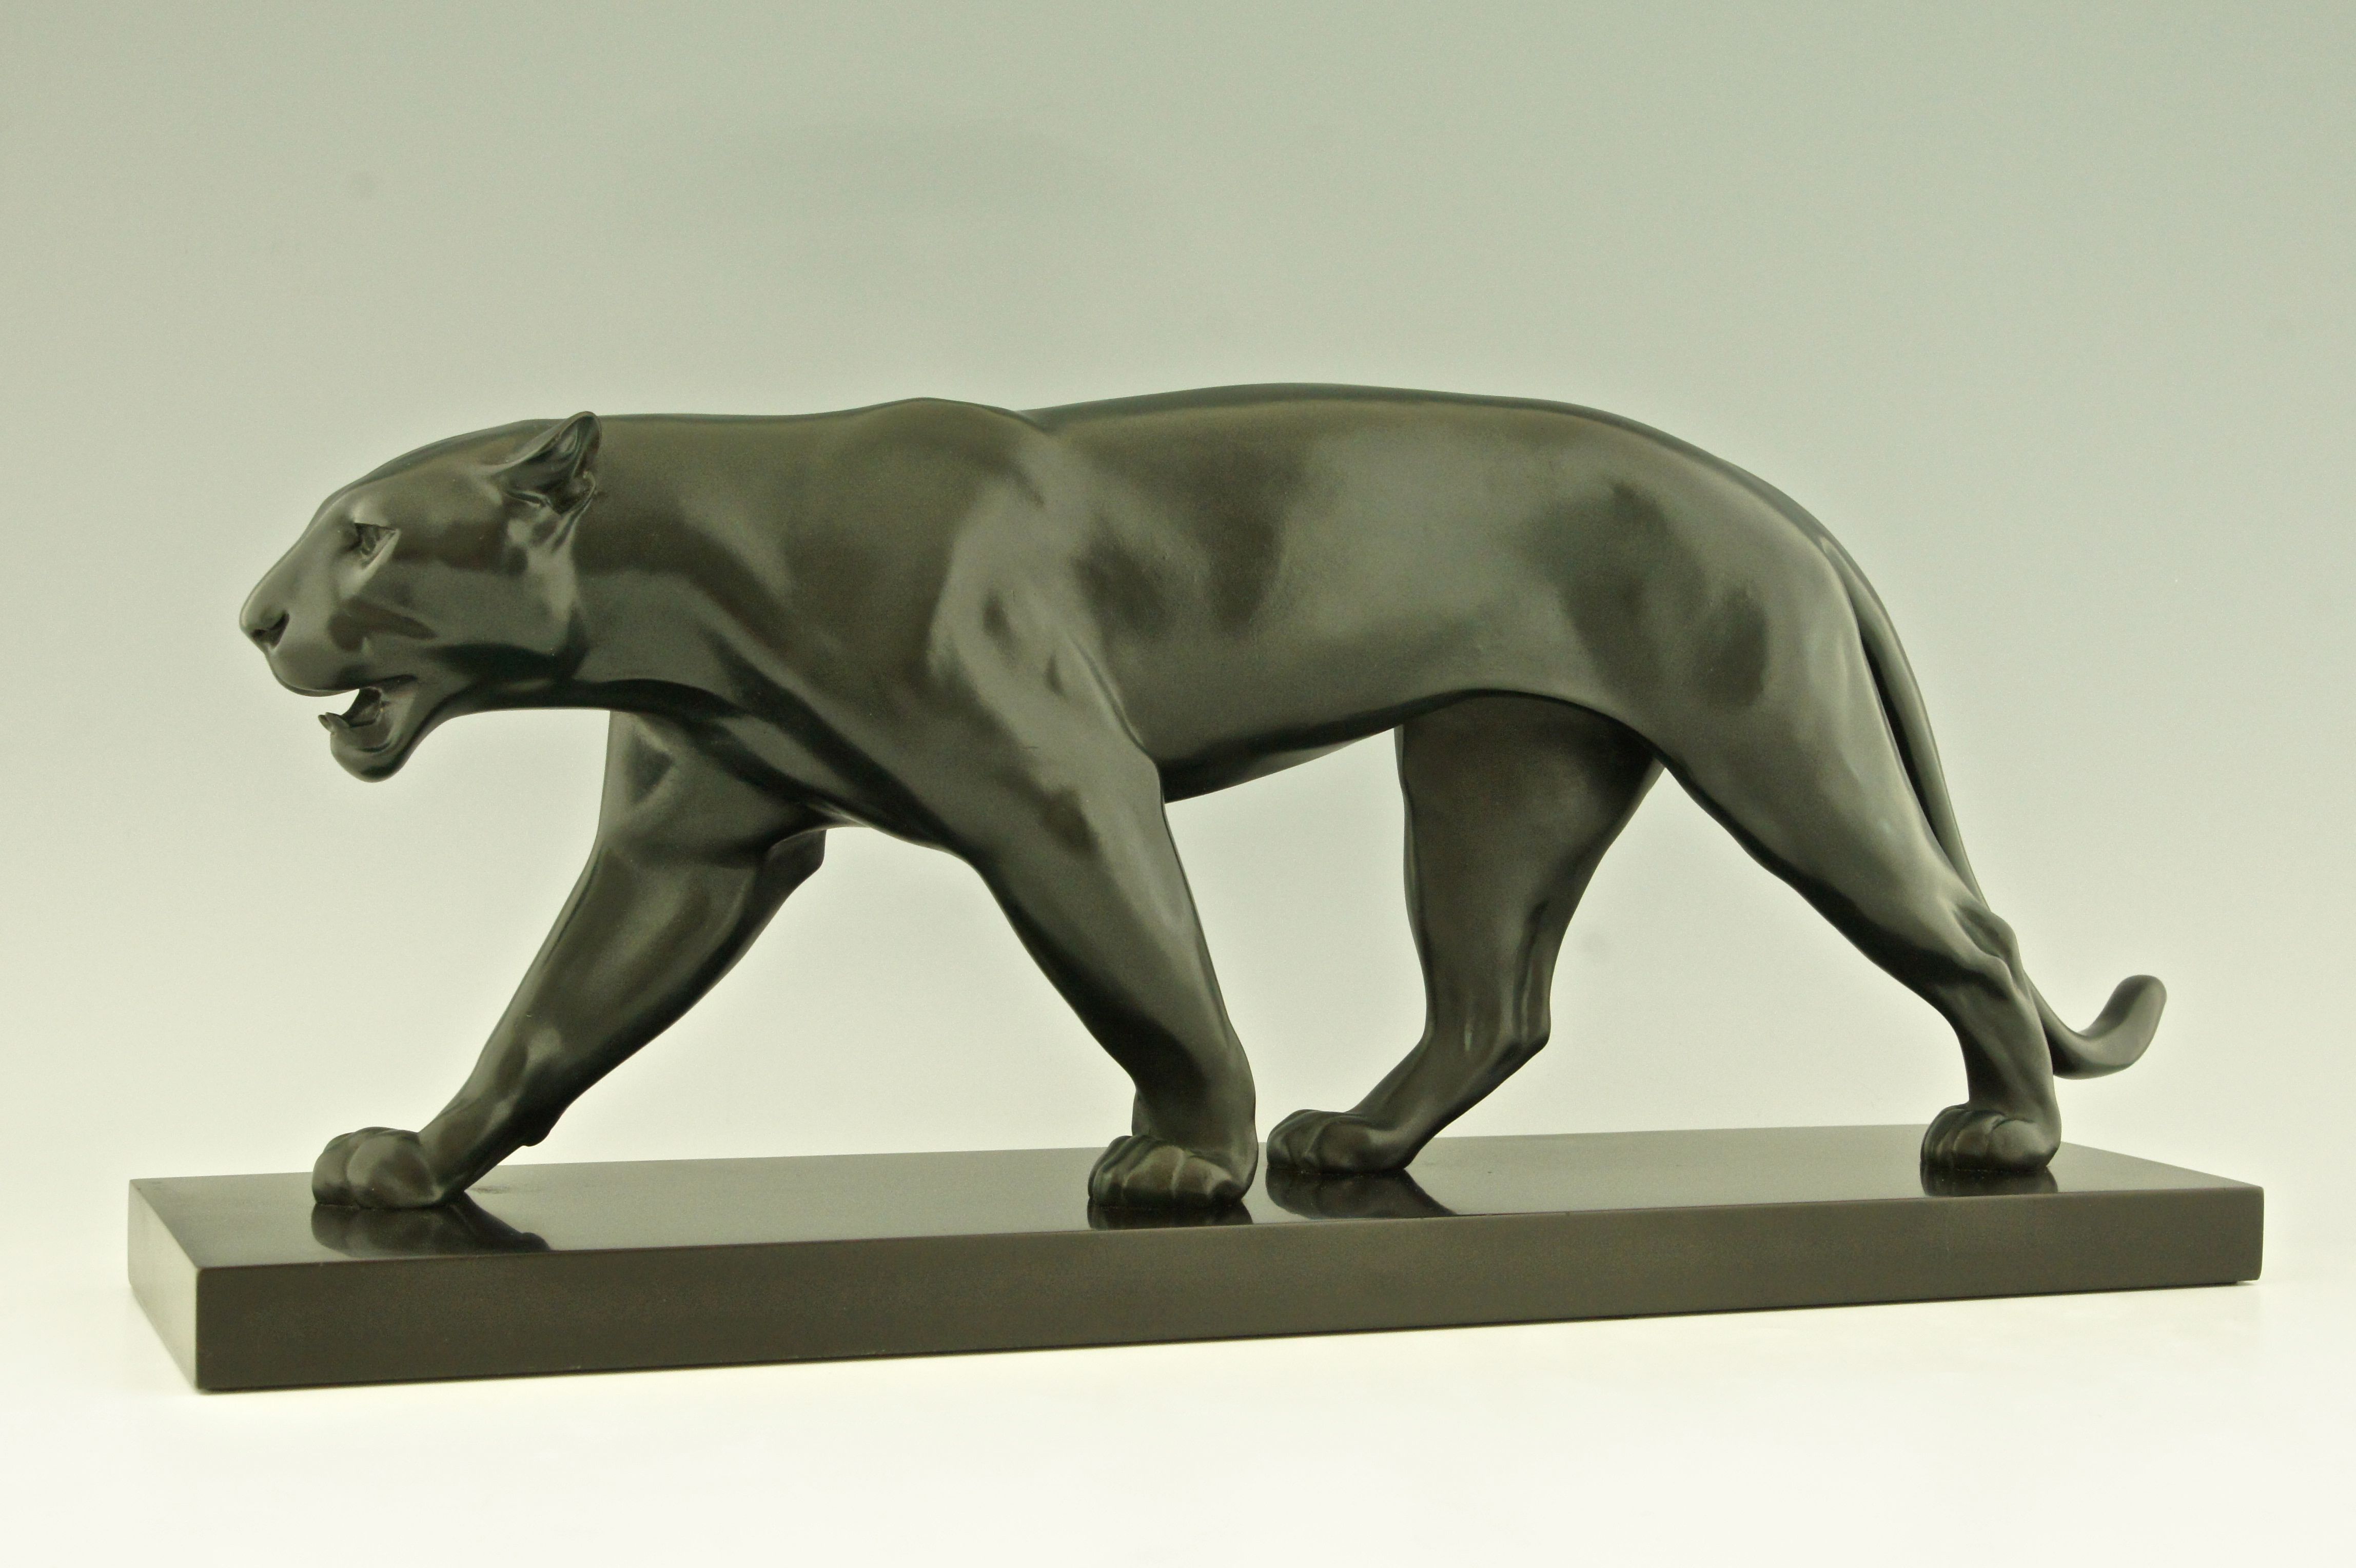 Art Deco Sculpture of Walking Panther by Max Le Verrier